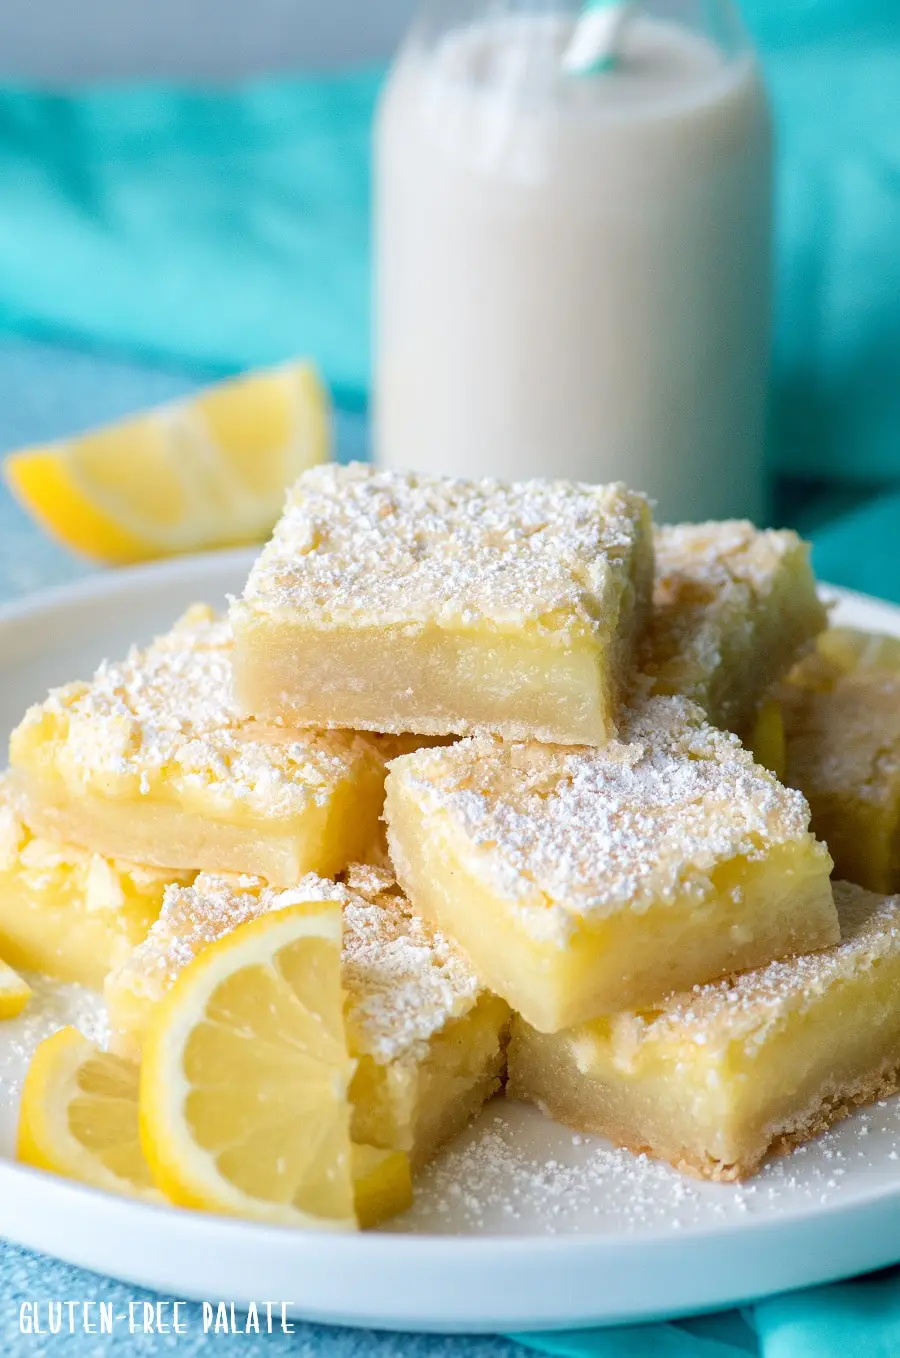 gluten-free lemon bars stacked on a white plate with a jar of milk, a slice of lemon, and a blue napkin in the background